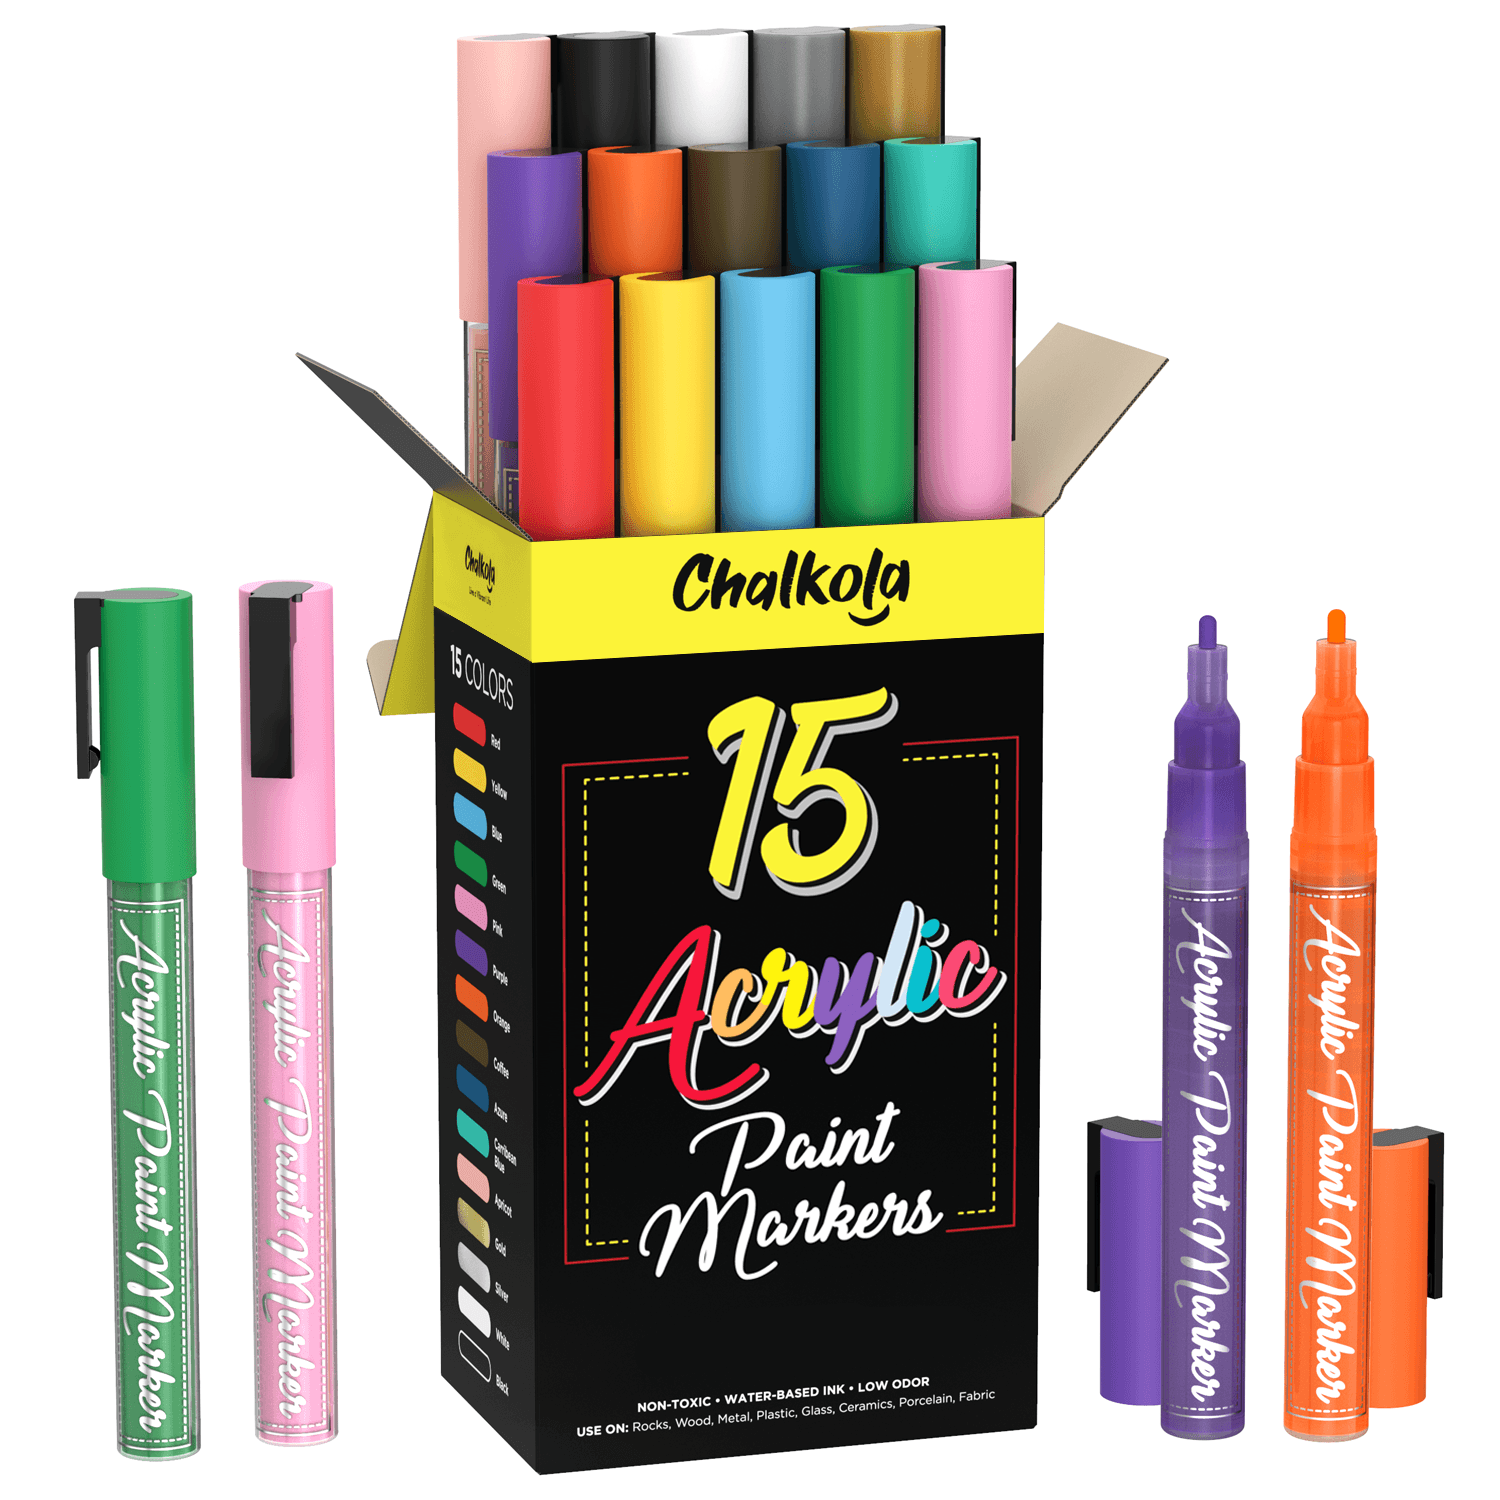 Acrylic Paint Marker Pens - Pack of 15 3mm Fine 